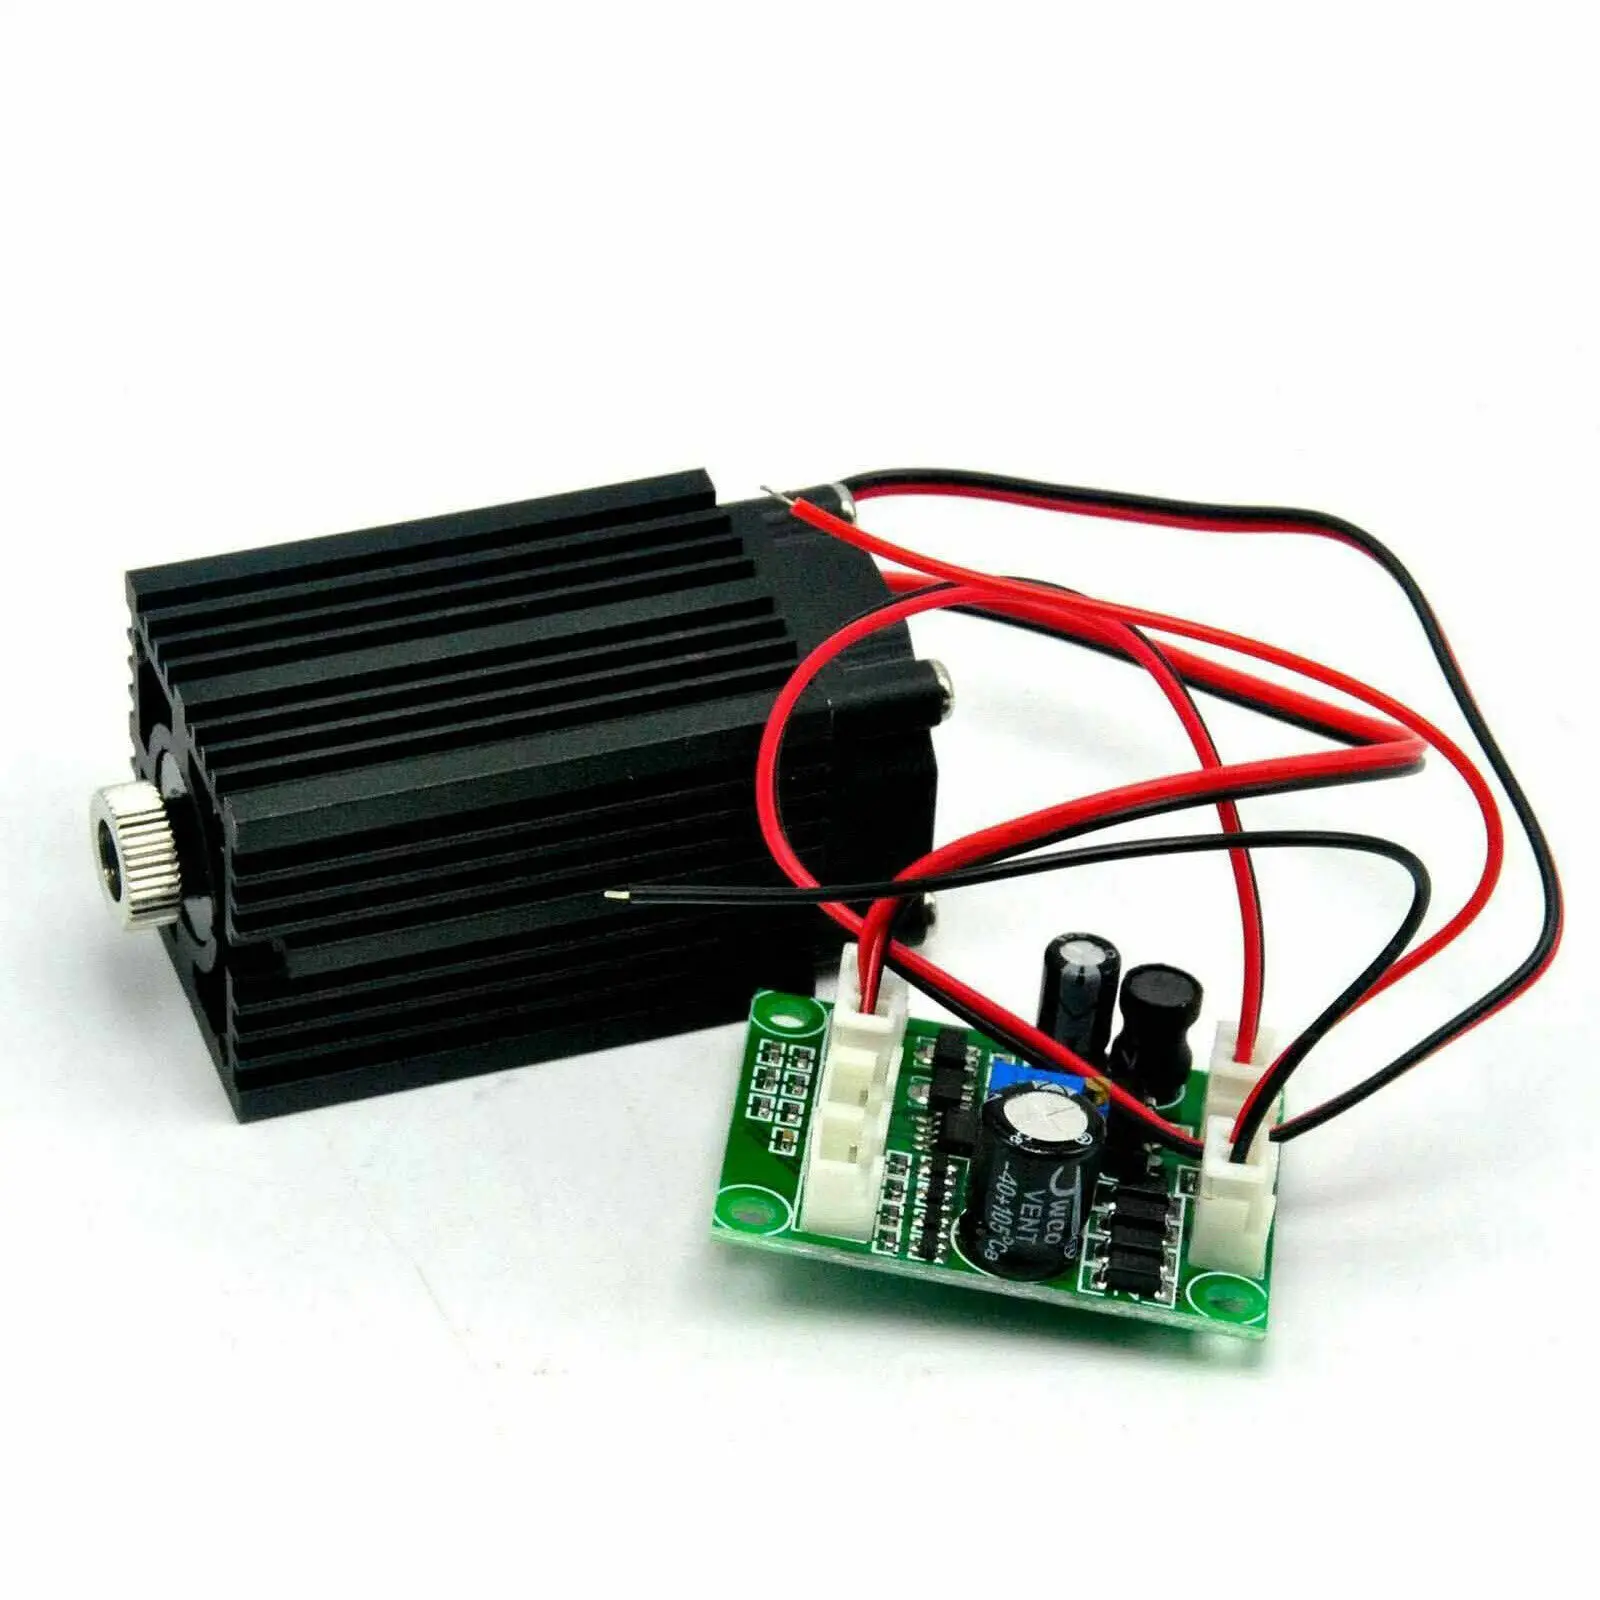 638nm 635nm 500mw Orange Red Laser Diode Line Module 33x33x50mm with TTL & Cooling Fan 12V